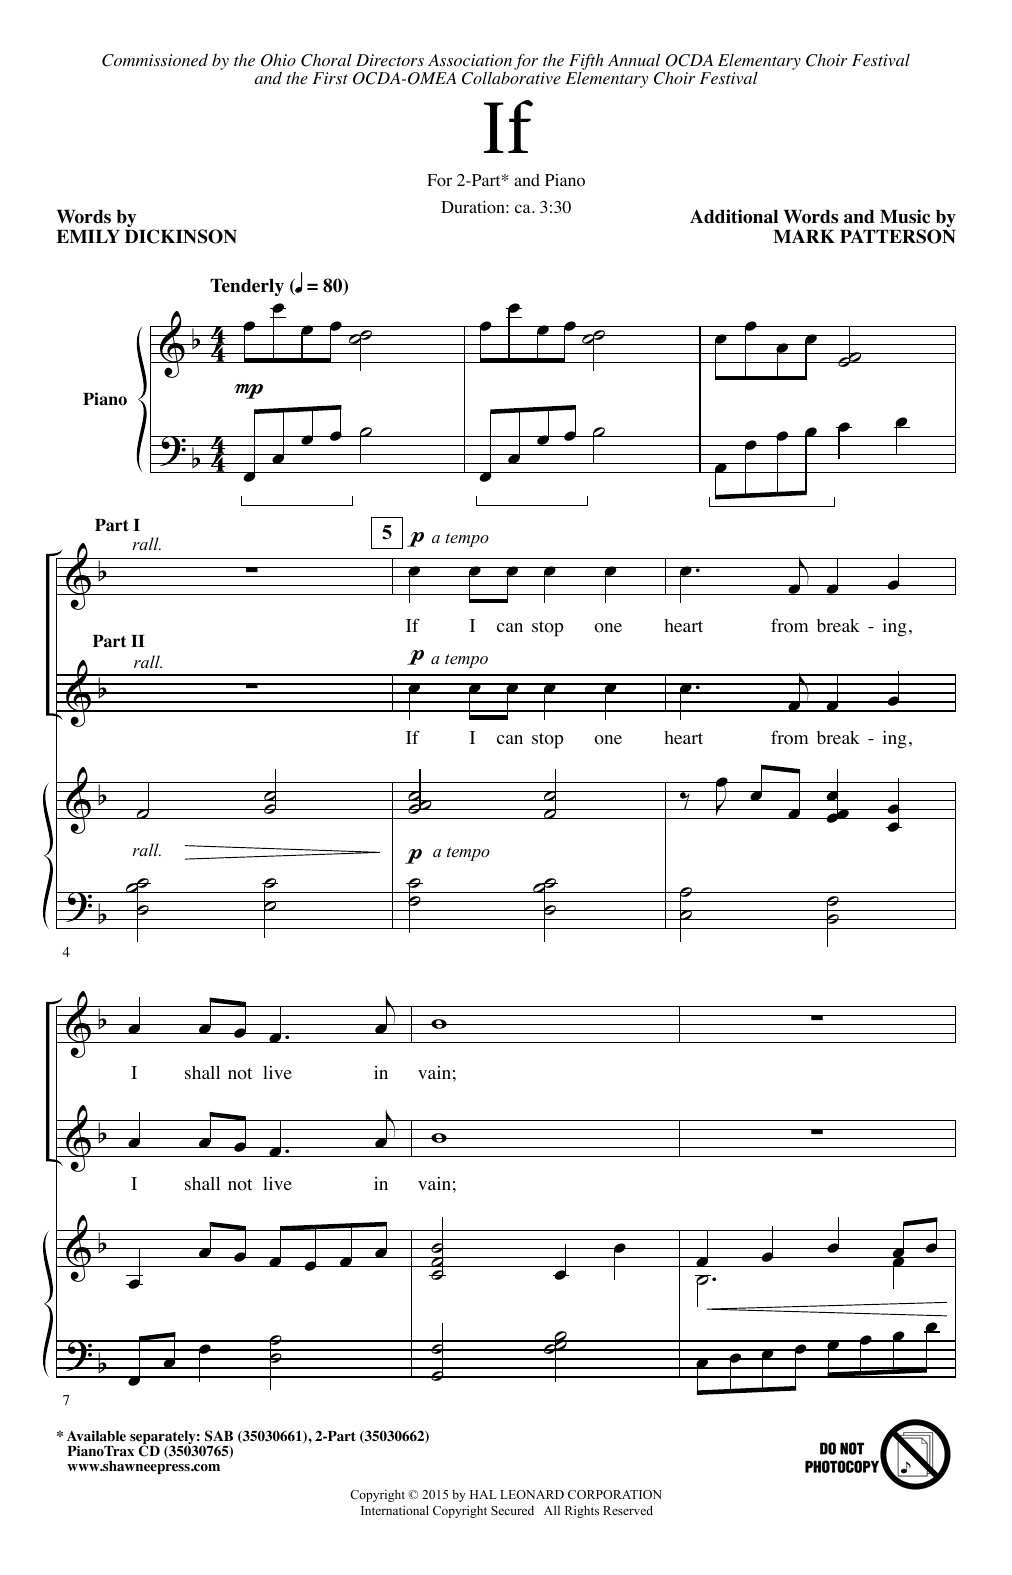 Download Mark Patterson If Sheet Music